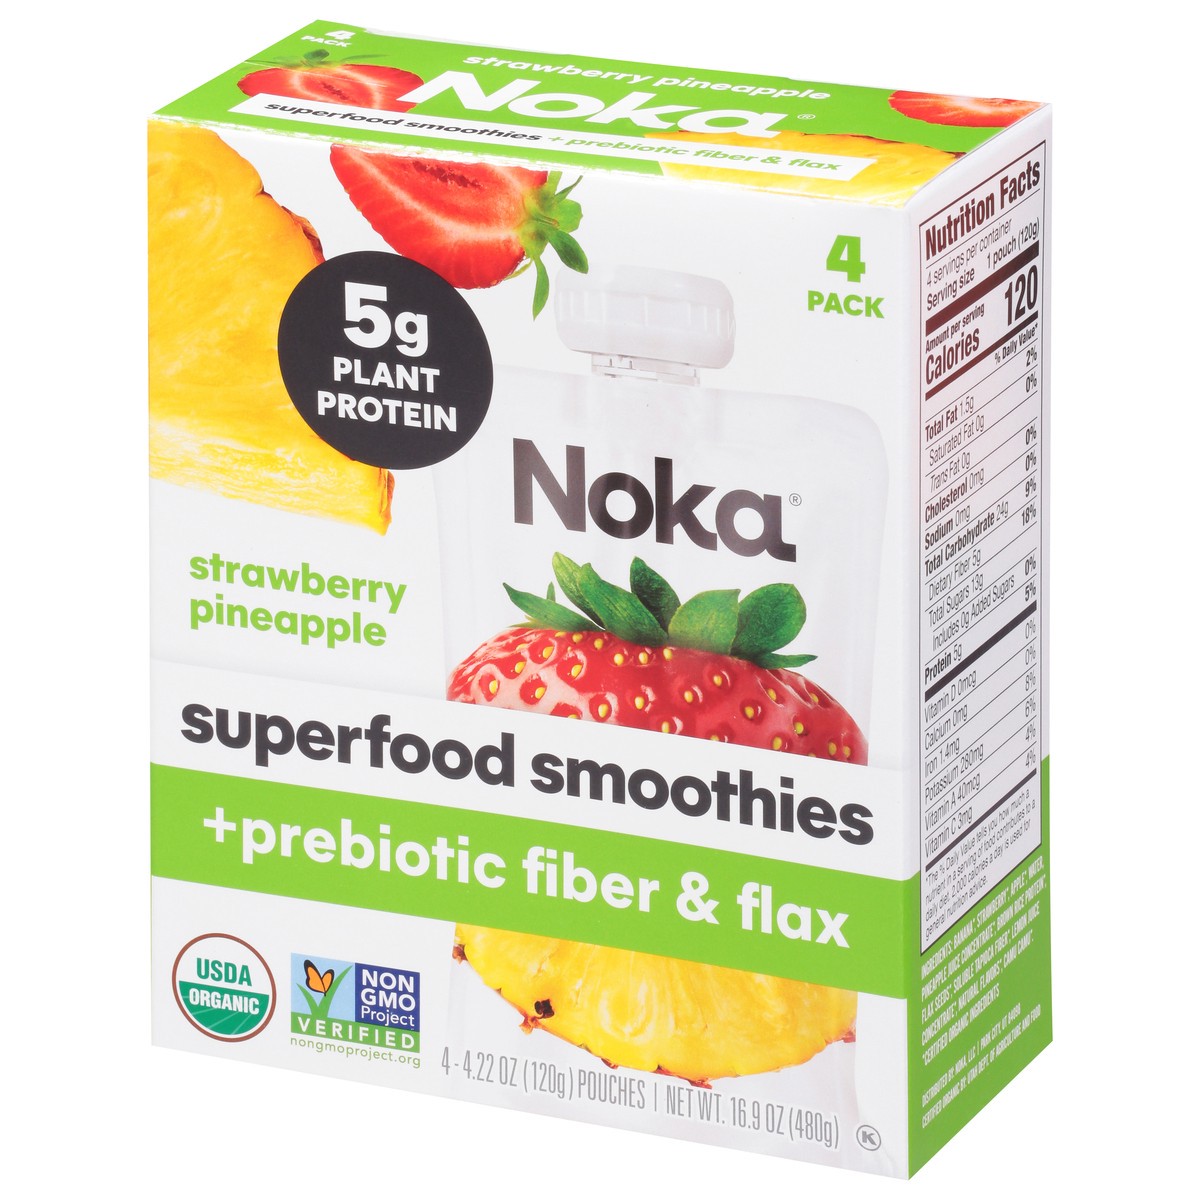 slide 7 of 14, NOKA 4 Pack Strawberry Pineapple Superfood Smoothies 4 - 4.22 oz Pouches, 4 ct